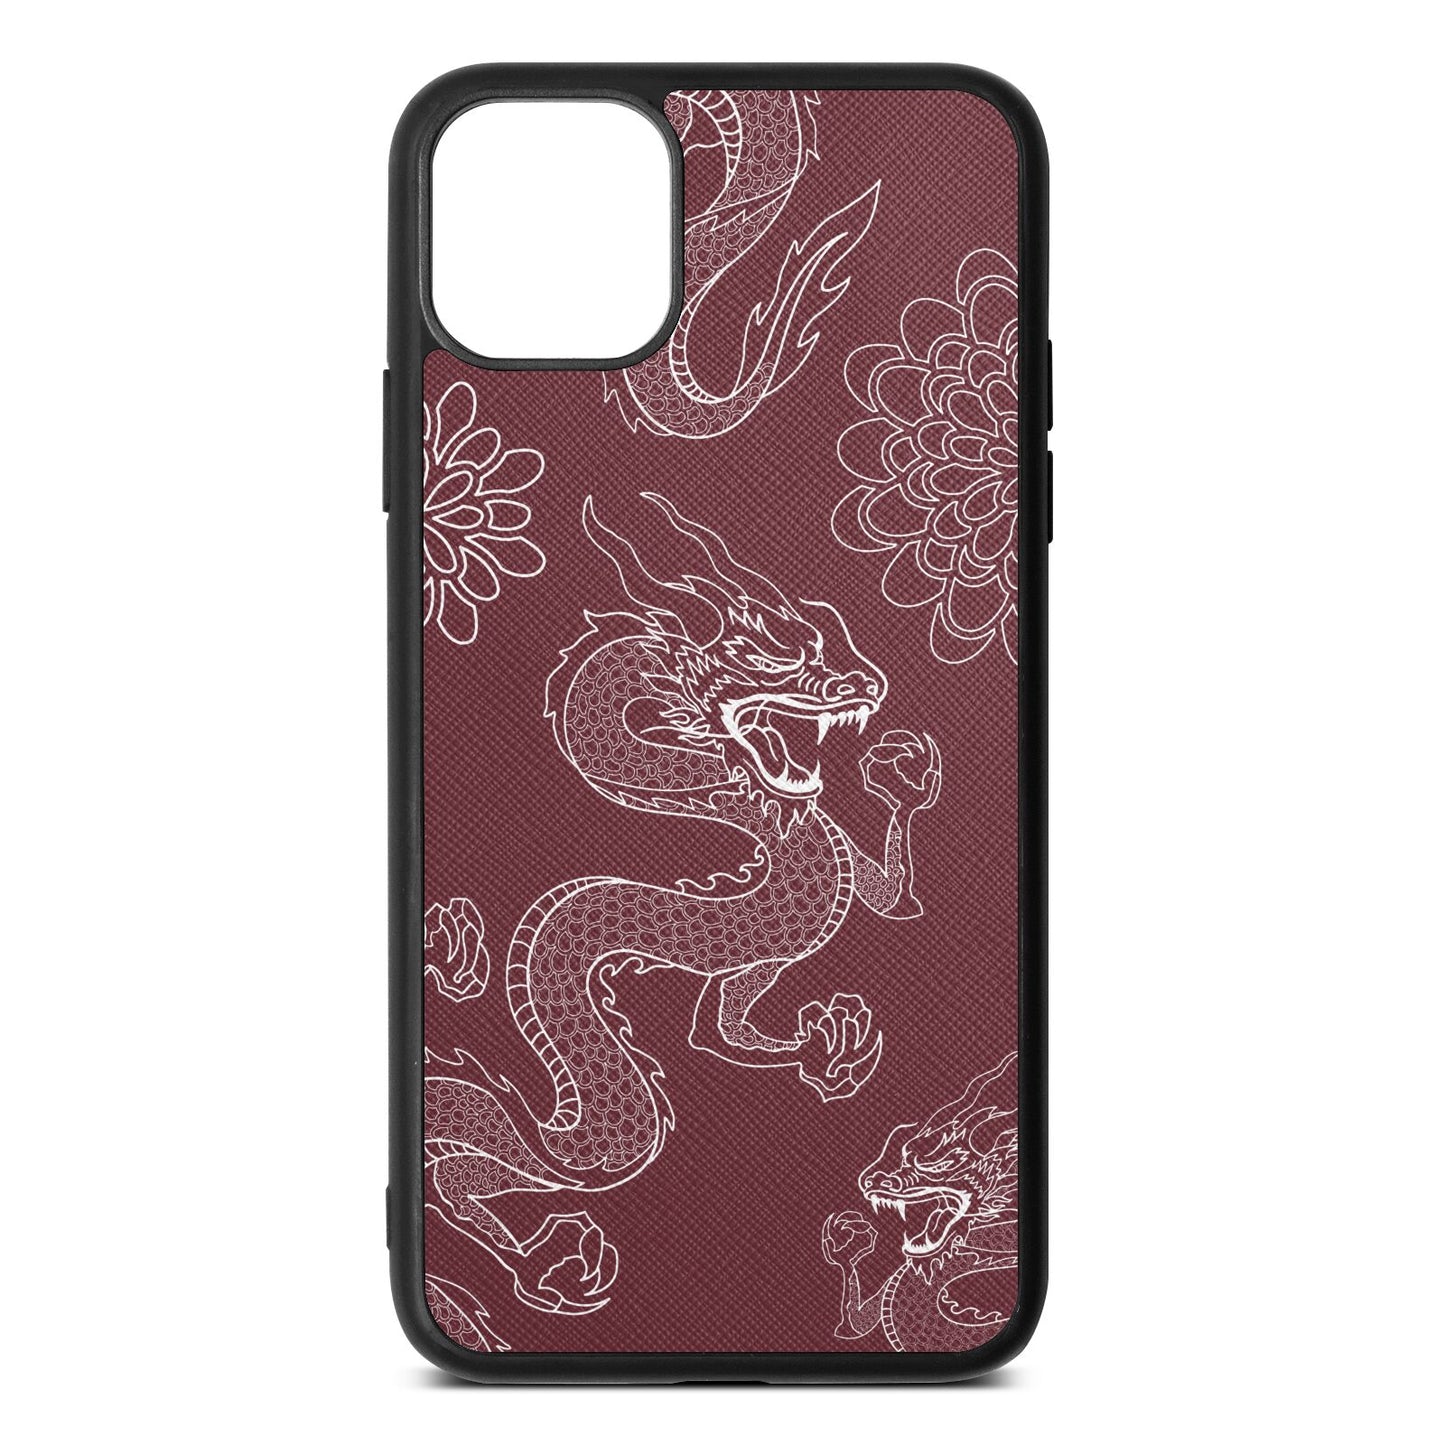 Dragons Rose Brown Saffiano Leather iPhone 11 Pro Max Case